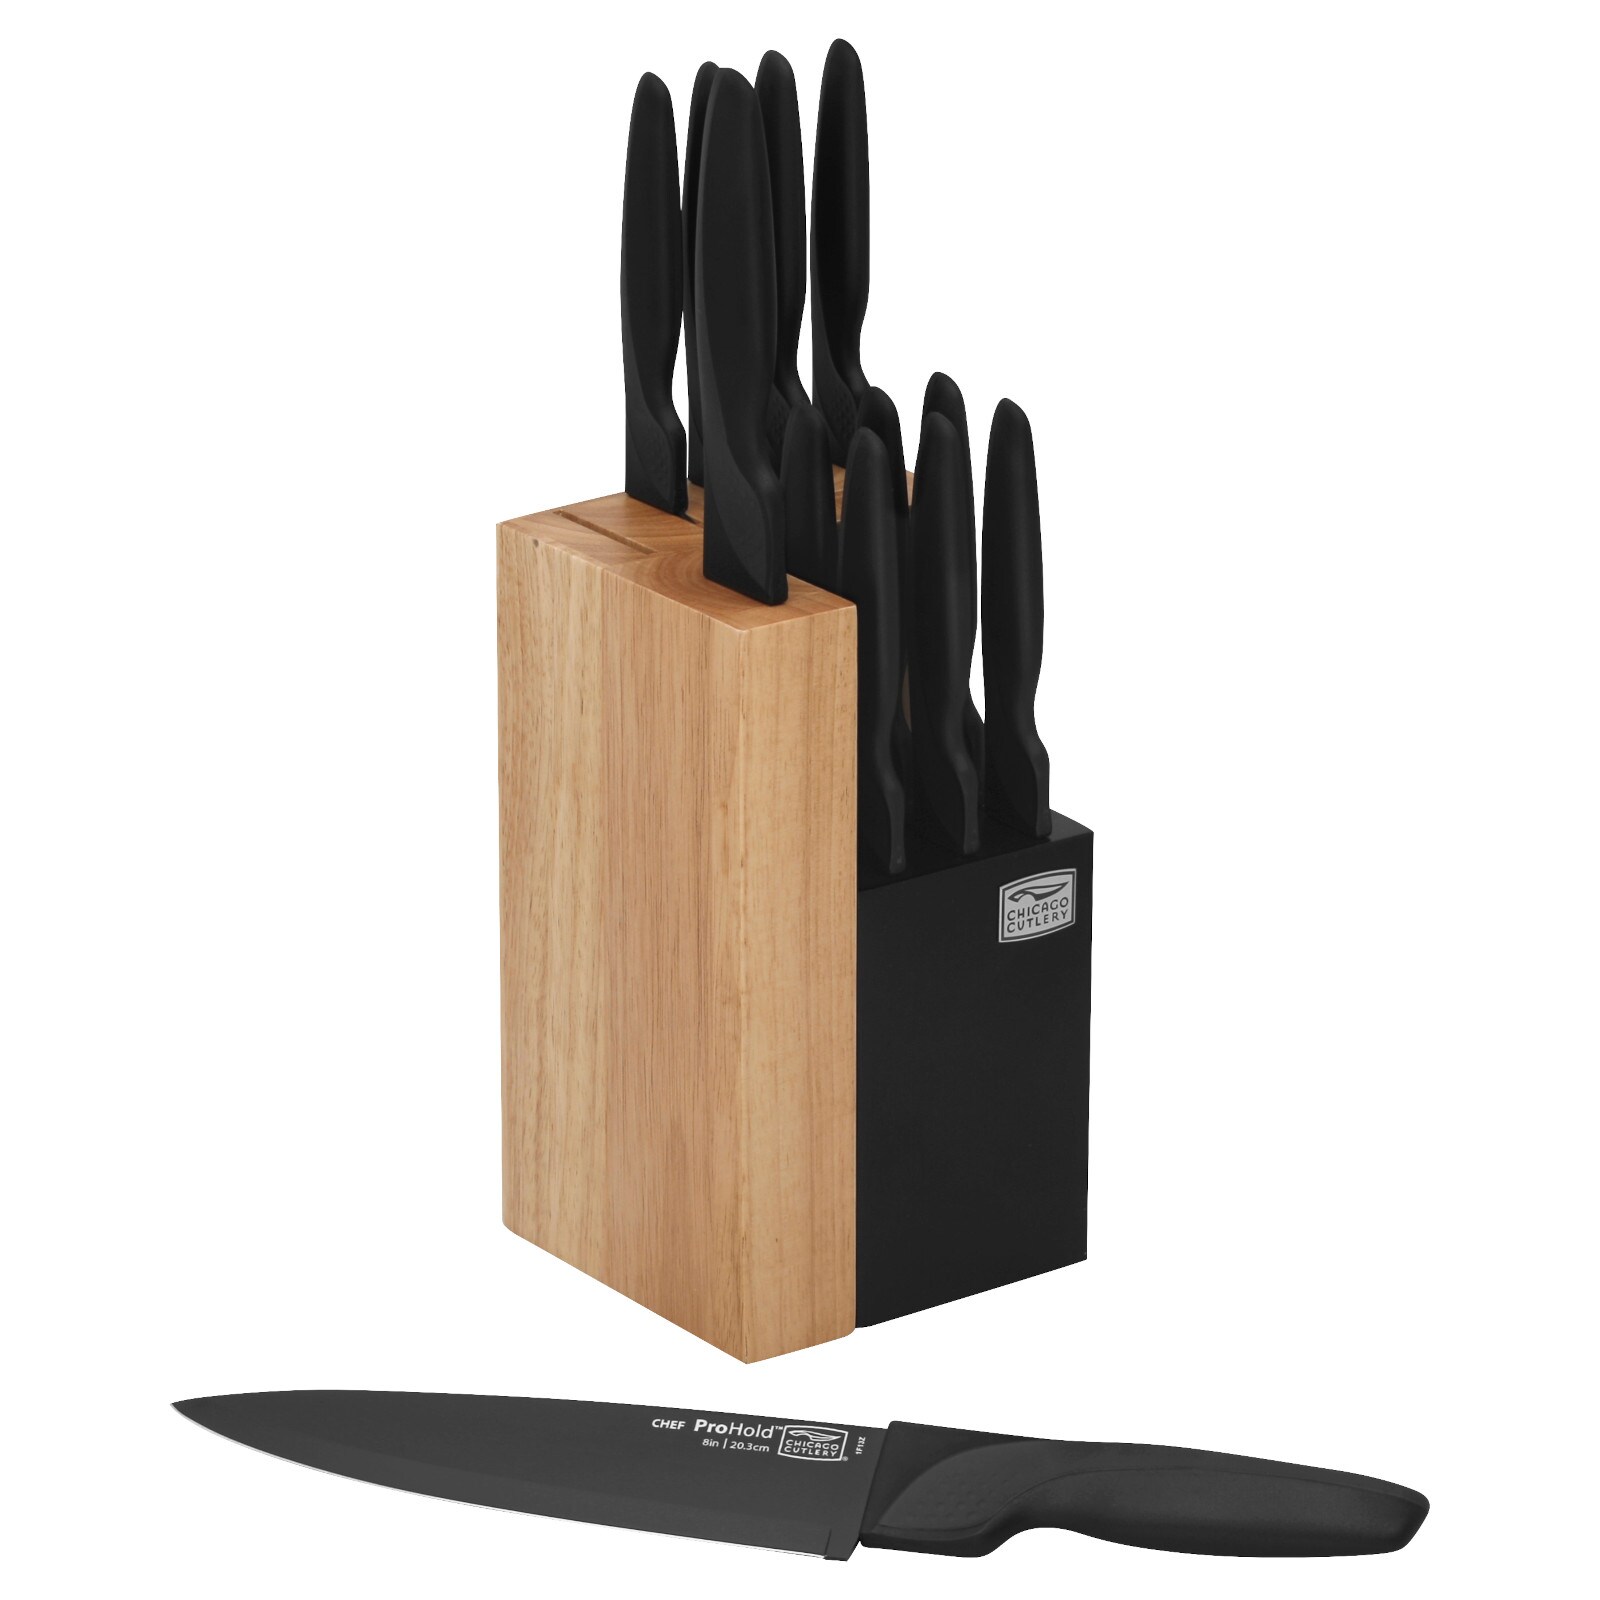 Chicago Cutlery Burling 14-piece Knife Set W/block Integrated Forged Steel  Handles 6D15R 